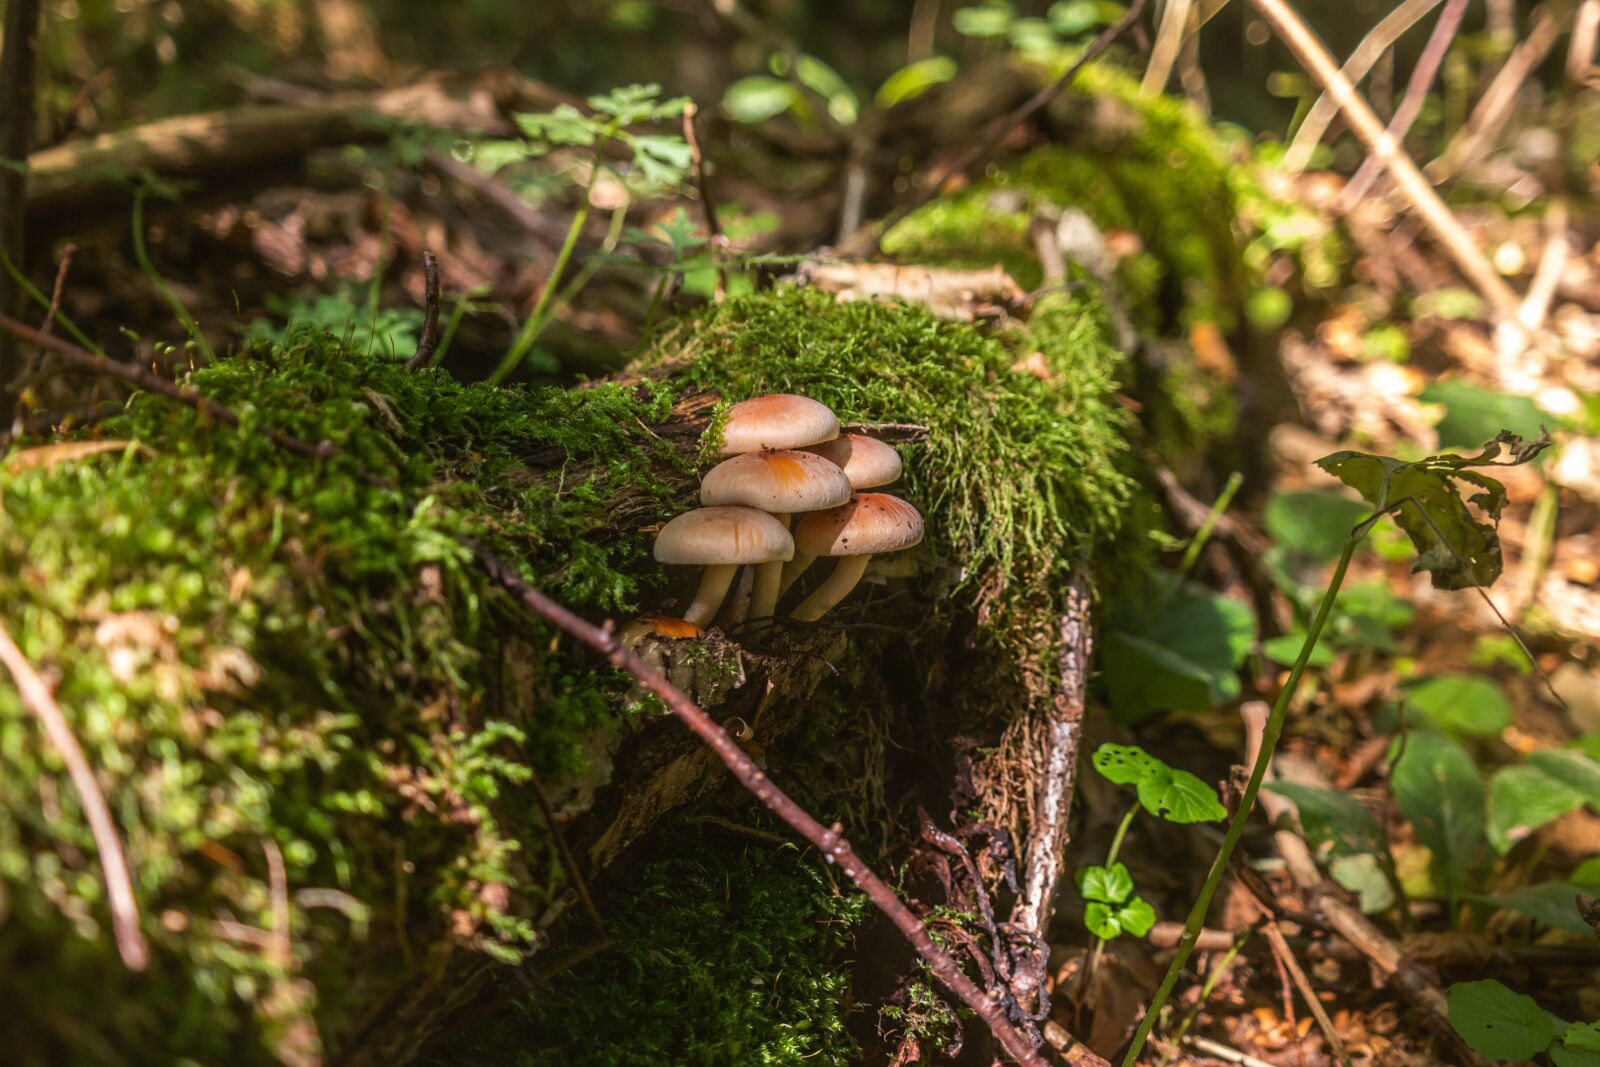 Samsung NX300 sample photo. Forest, mushrooms, nature photography